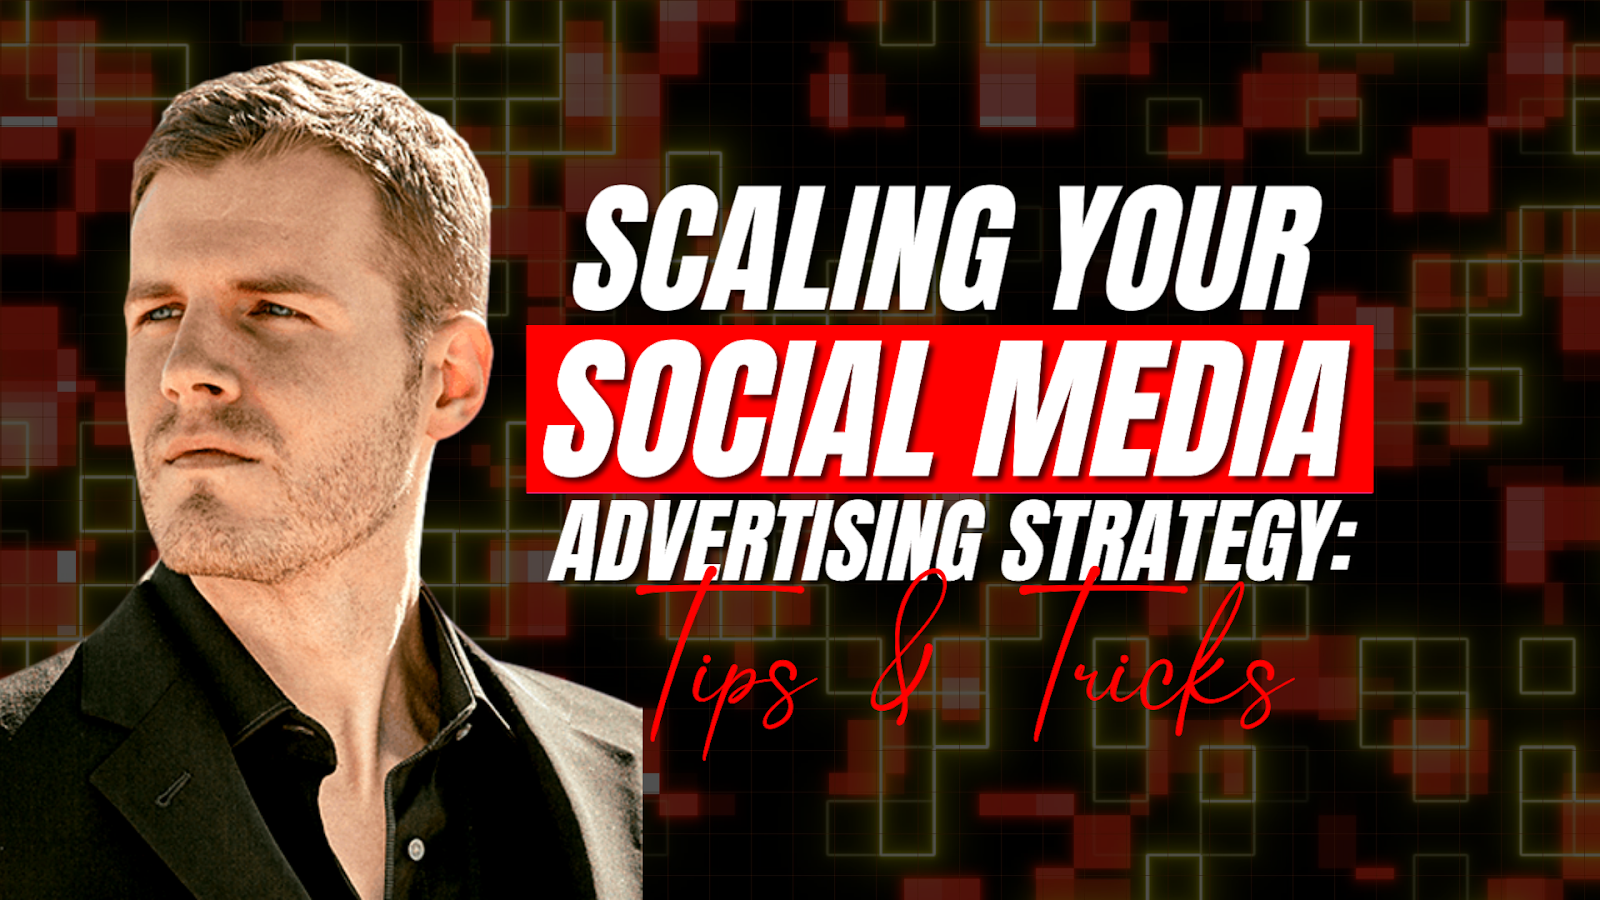 Scaling Your Social Media Advertising Strategy: Tips and Tricks - HYROS